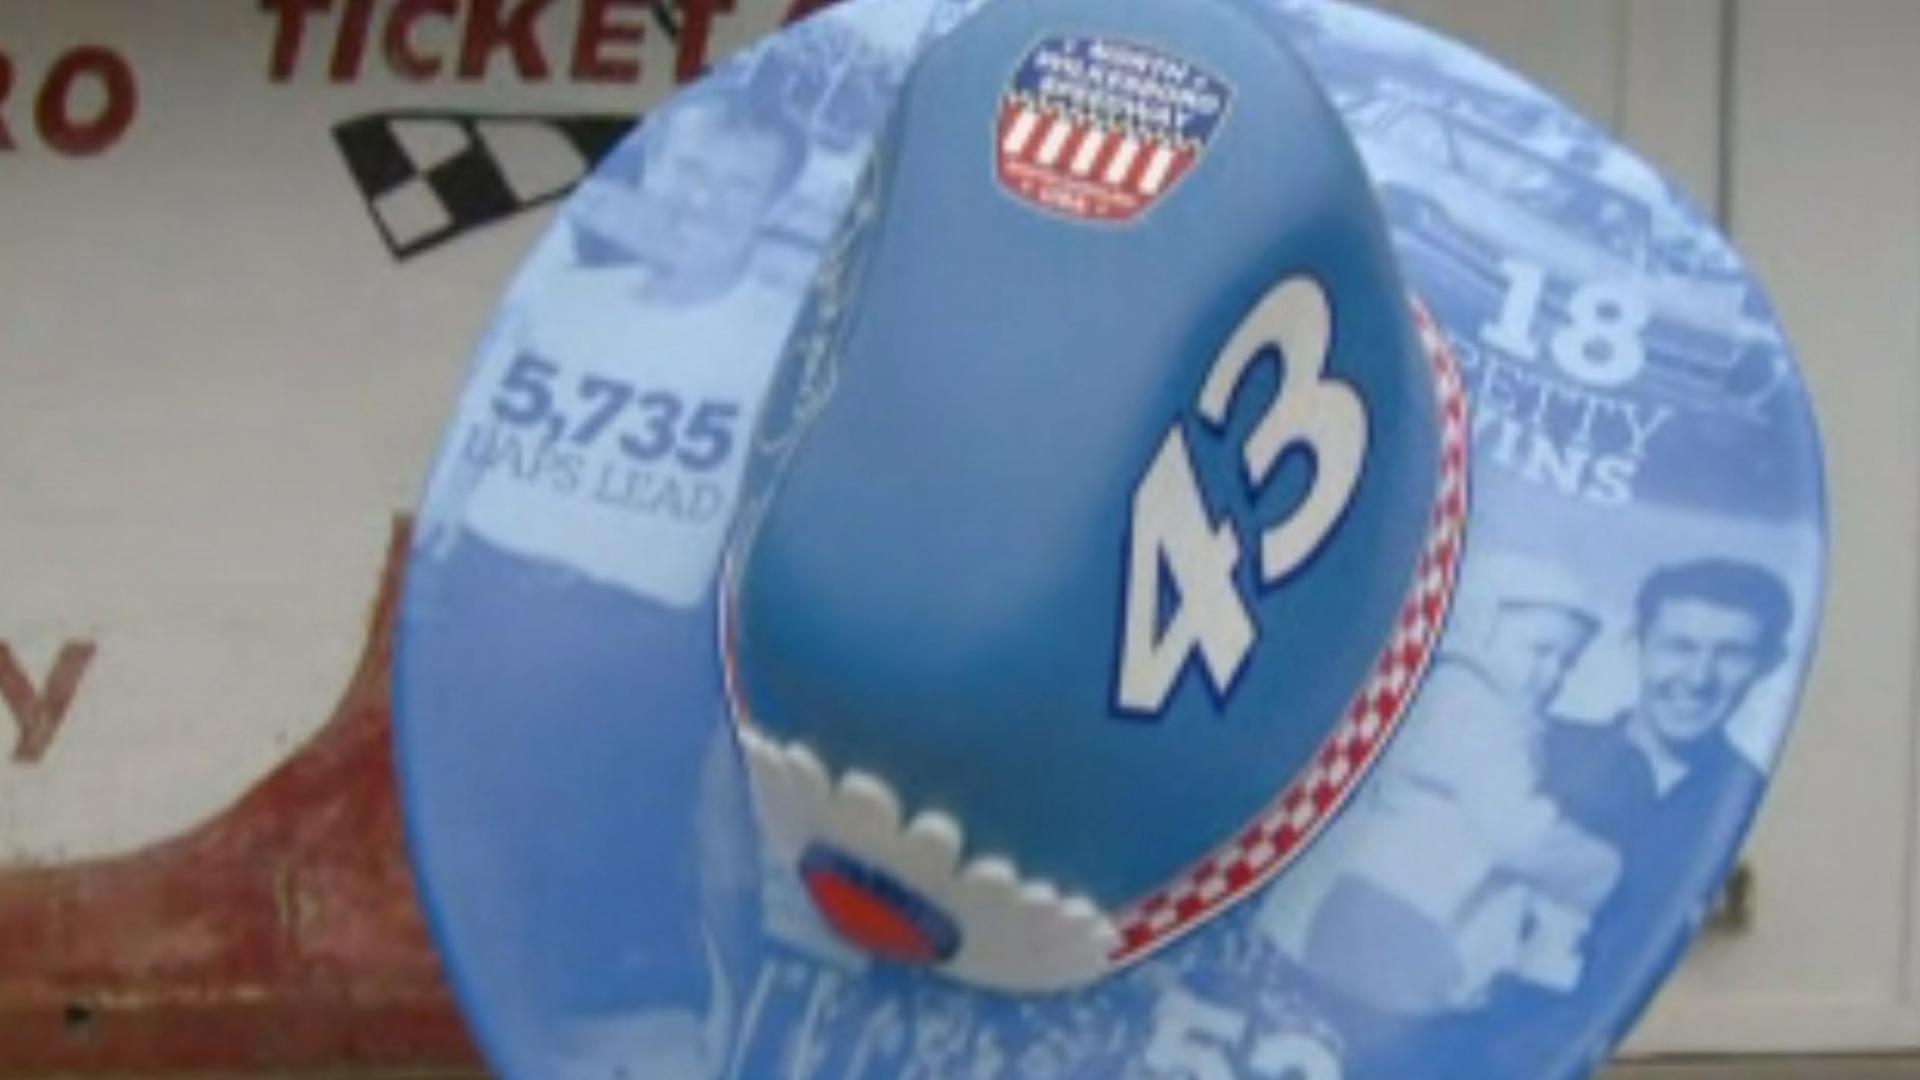 NASCAR is honoring 75 years of Petty Racing by unveiling Richard Petty's iconic hats at tracks around the country. This one is on North Wilkesboro Speedway.